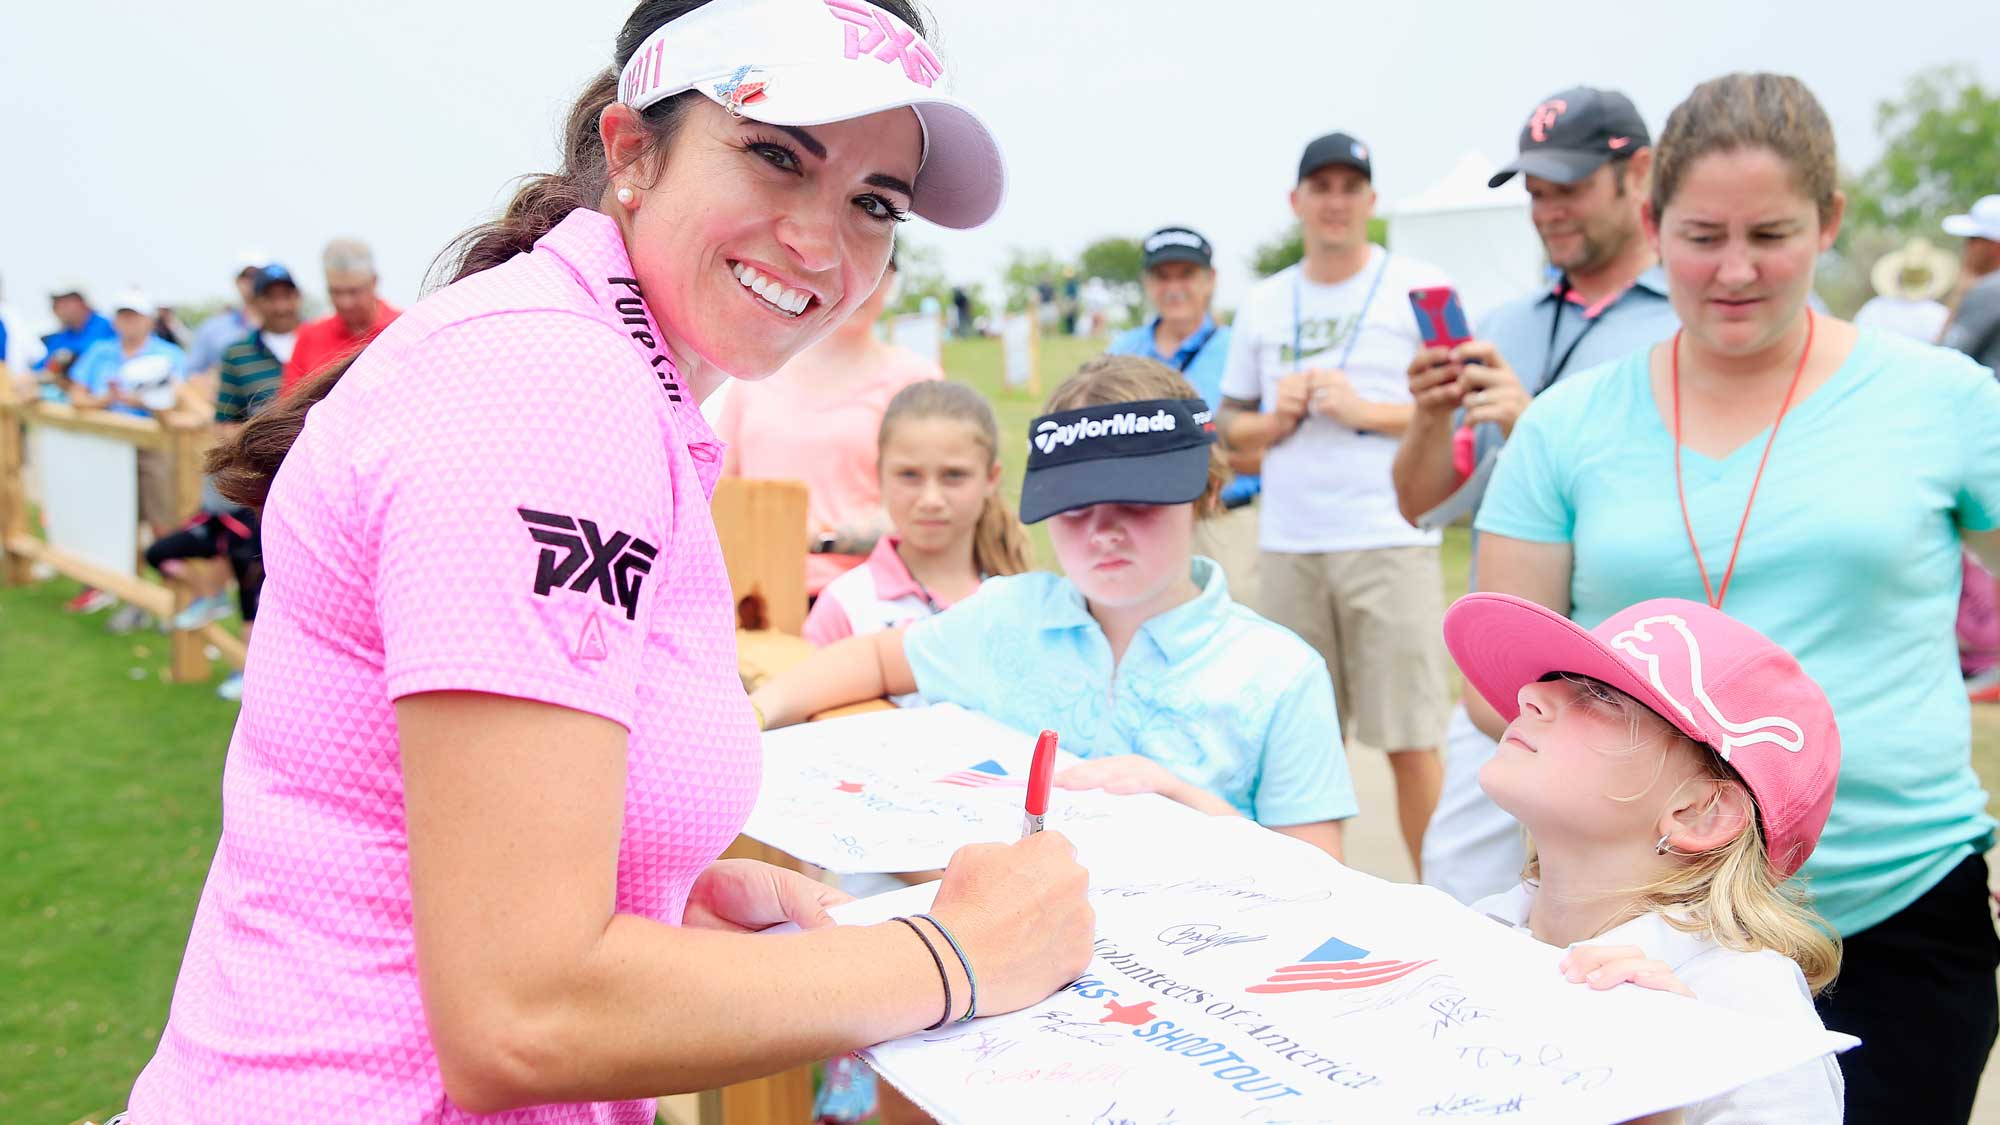 Gerina Piller poses as she signs an autograph for a fan after finishing with a six-under par 65 during the second round of the Volunteers of America Texas Shootout